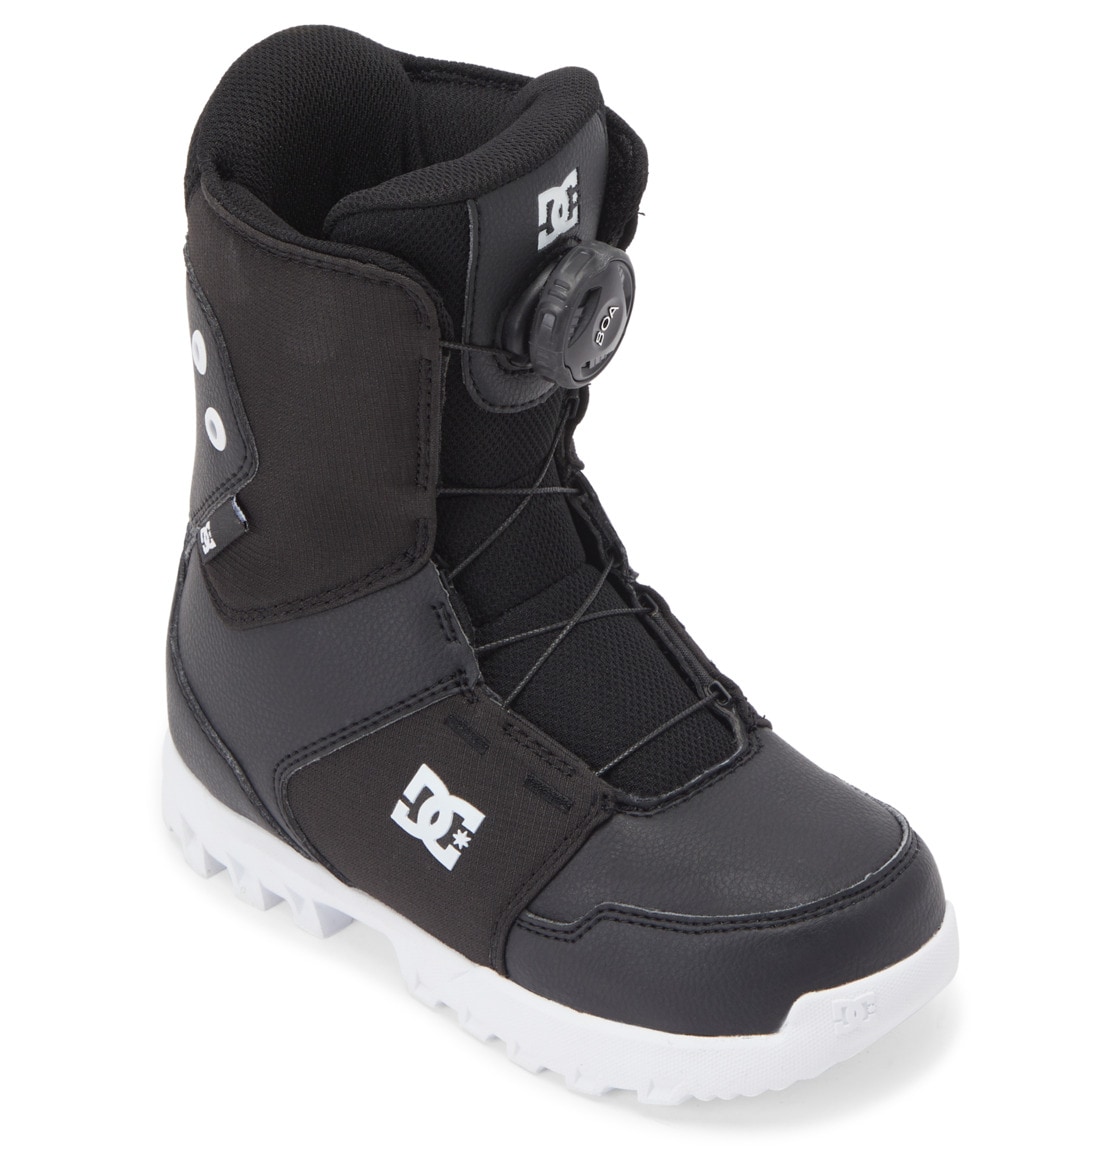 DC Shoes Snowboardboots "Youth Scout"